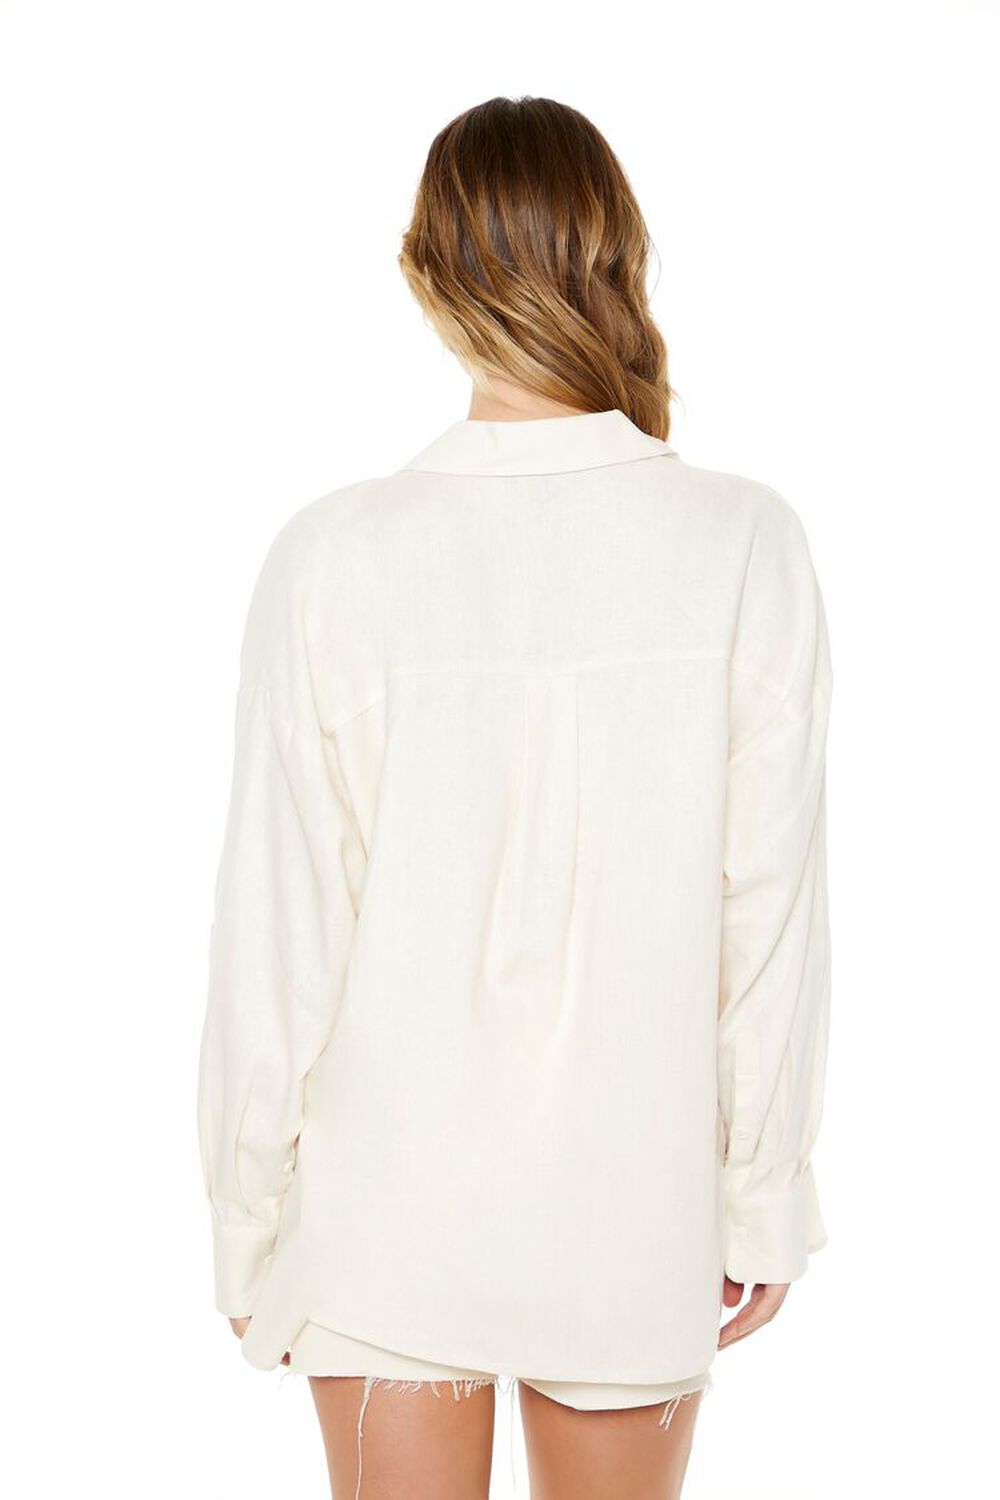 IVORY Button-Front Pocket Shirt, image 3